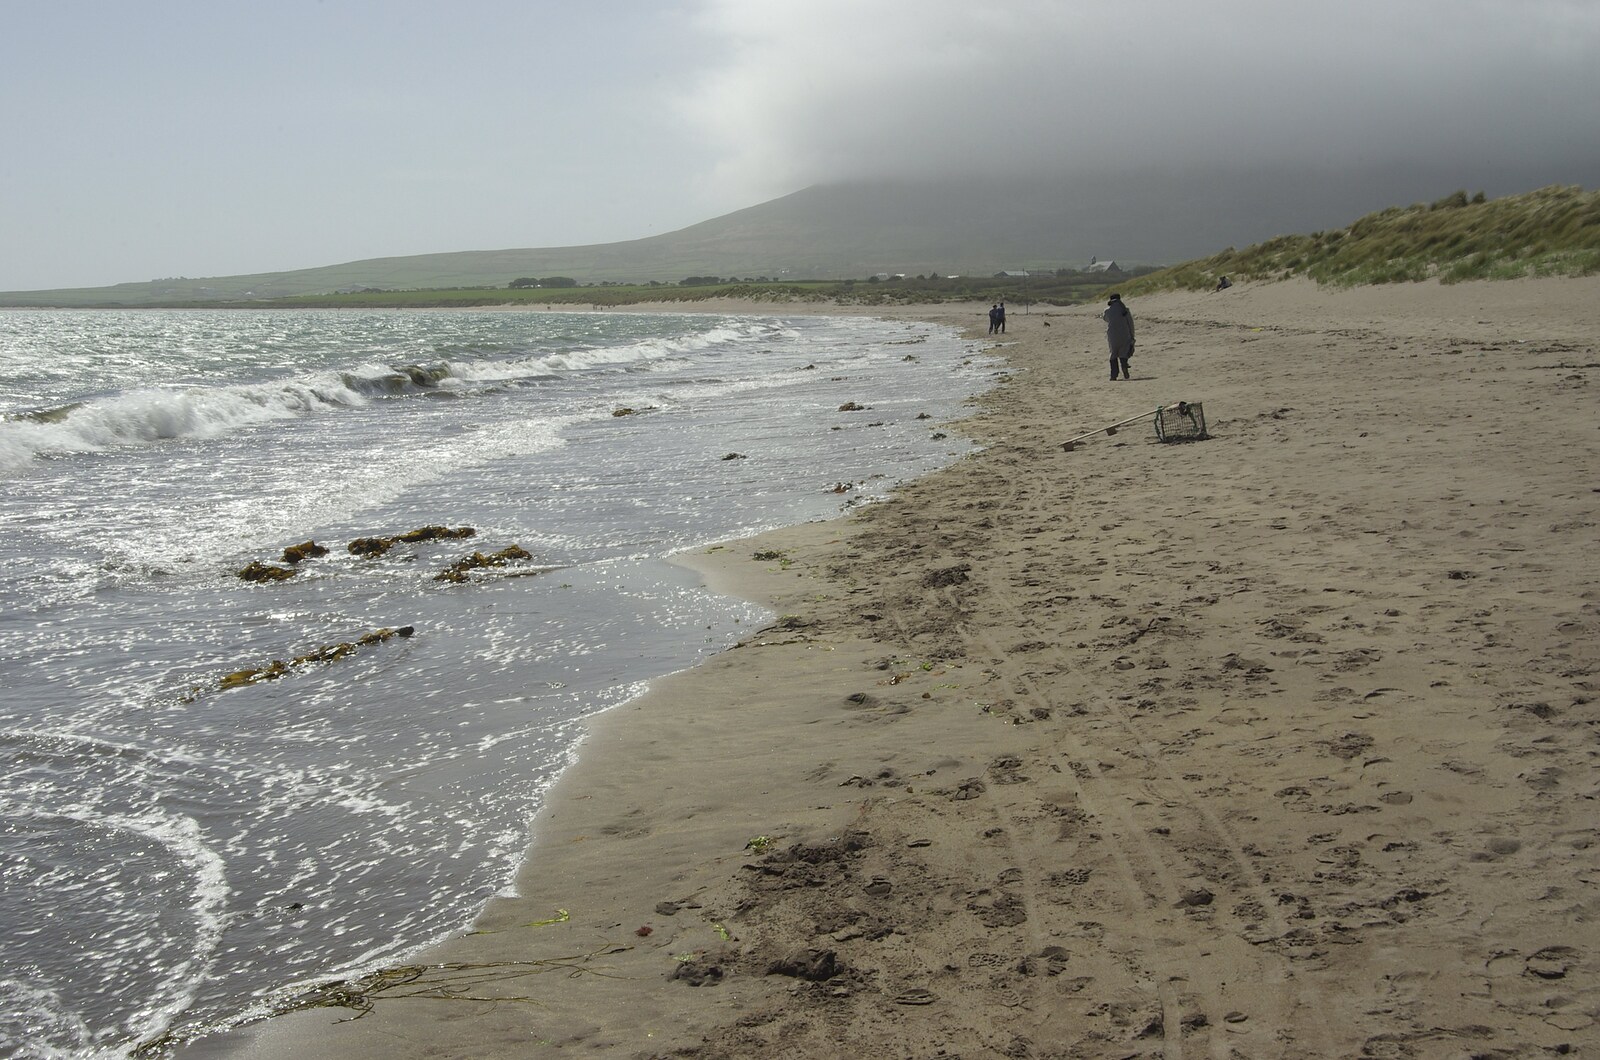 Connor Pass, Slea Head and Dingle, County Kerry, Ireland - 4th May 2008: On the beach